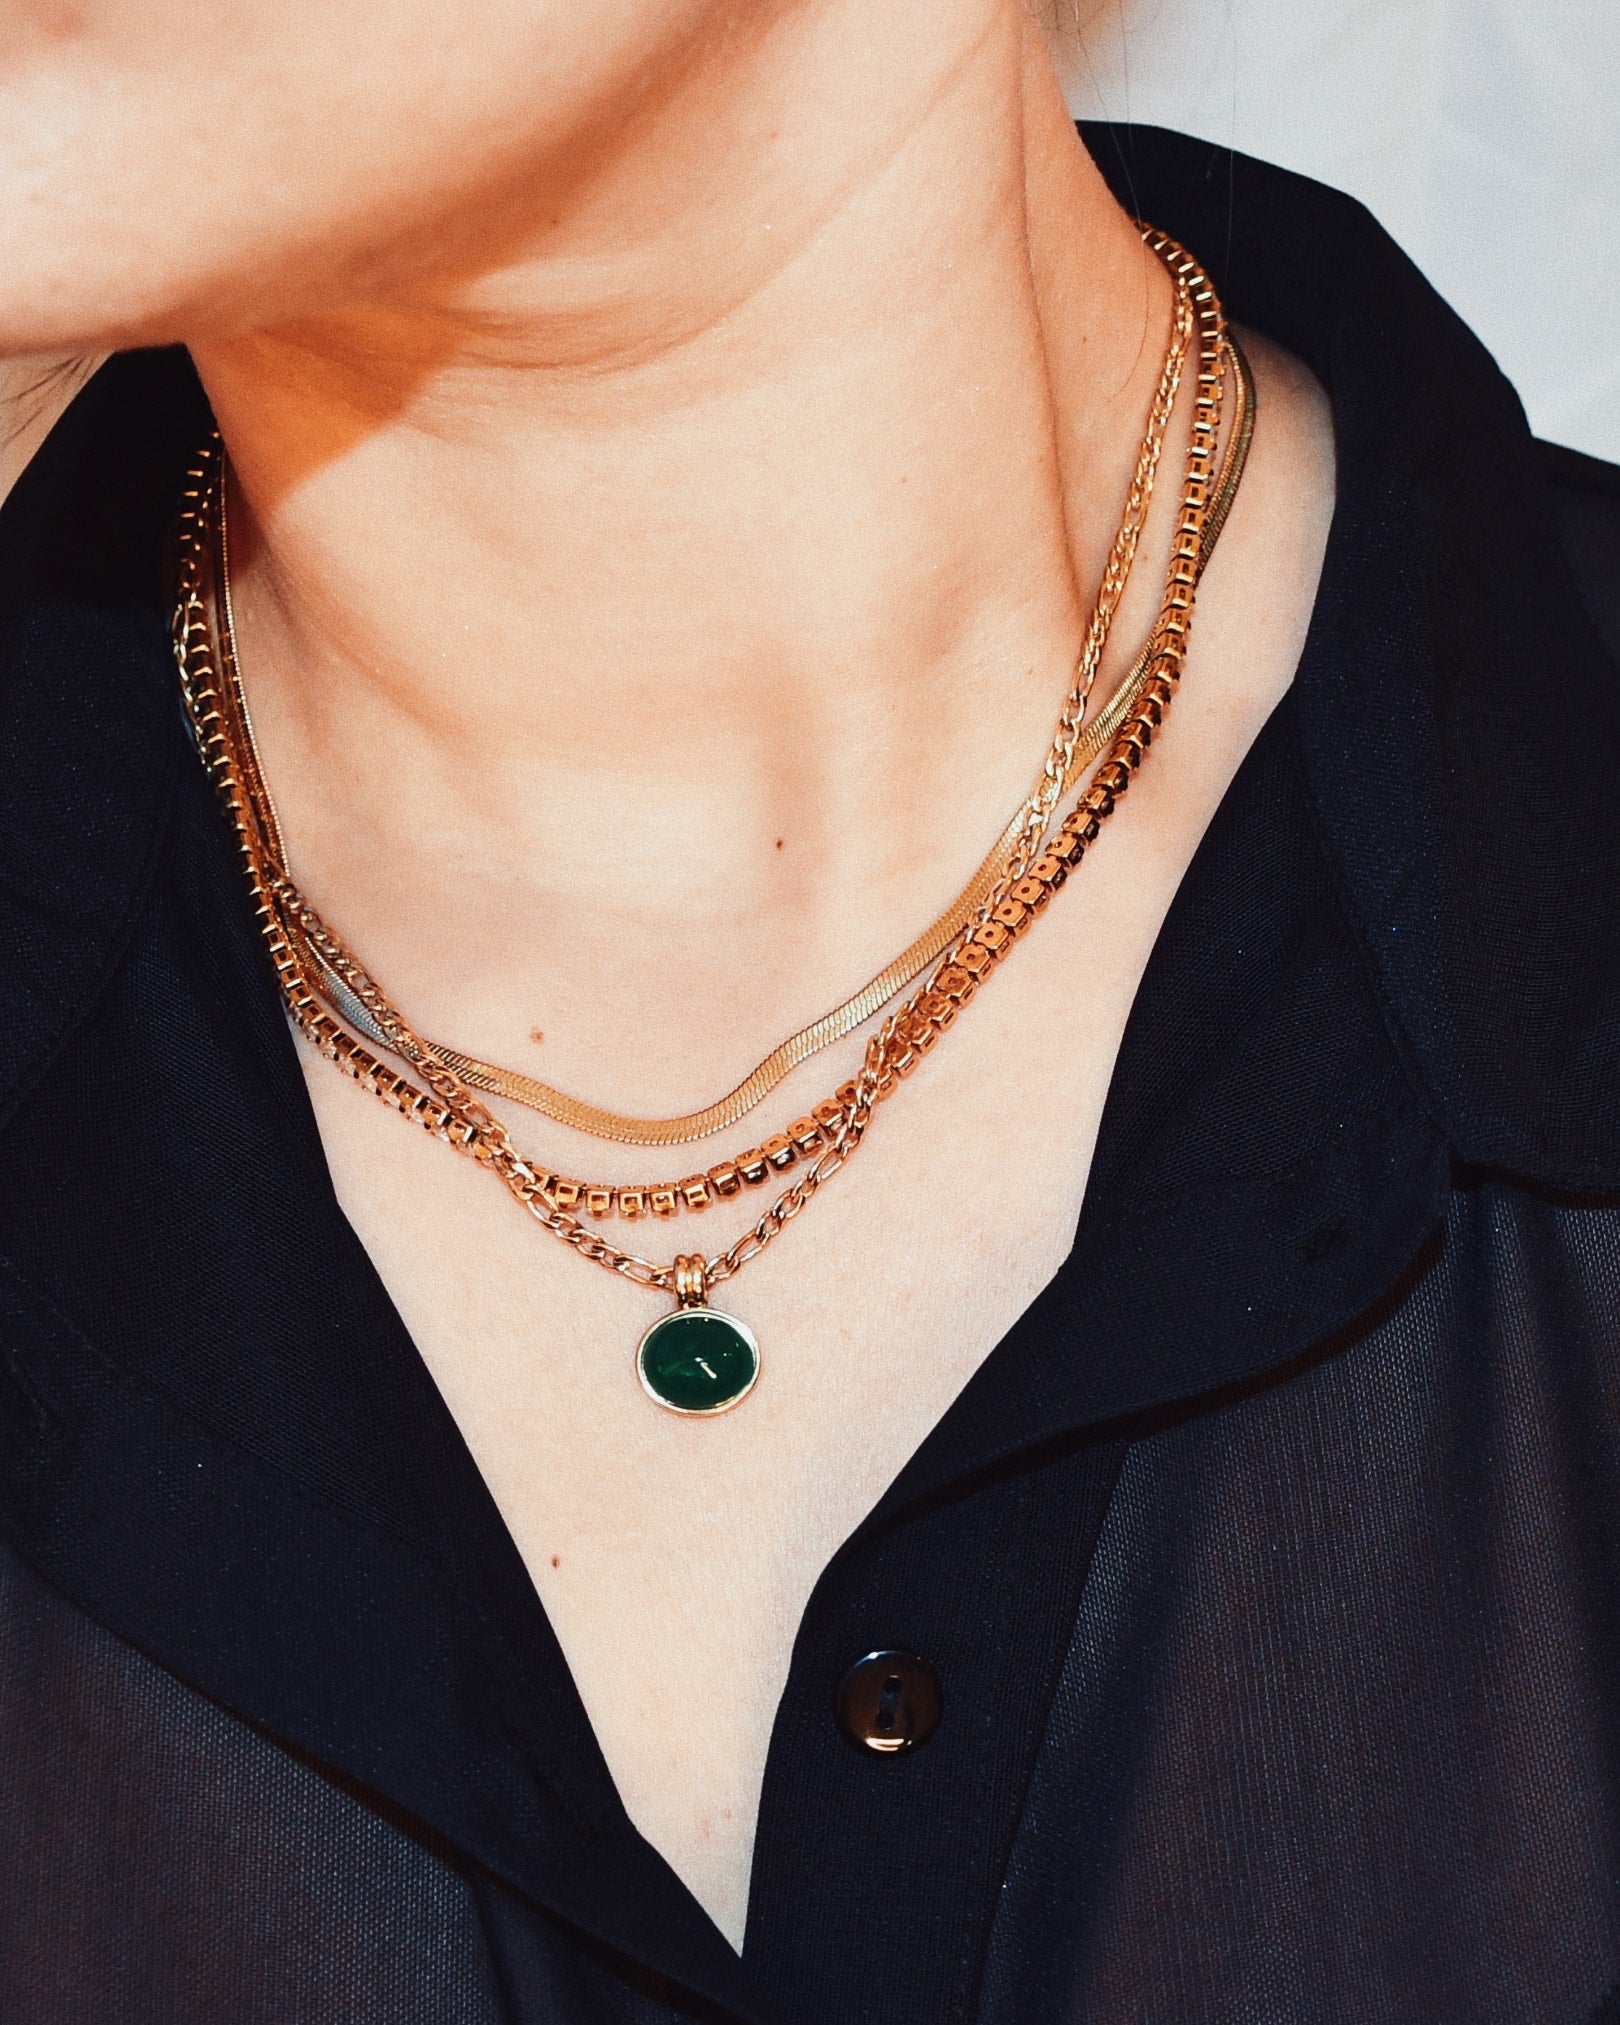 Stylish photography of woman Serpentine Chain Necklace layered with other necklaces